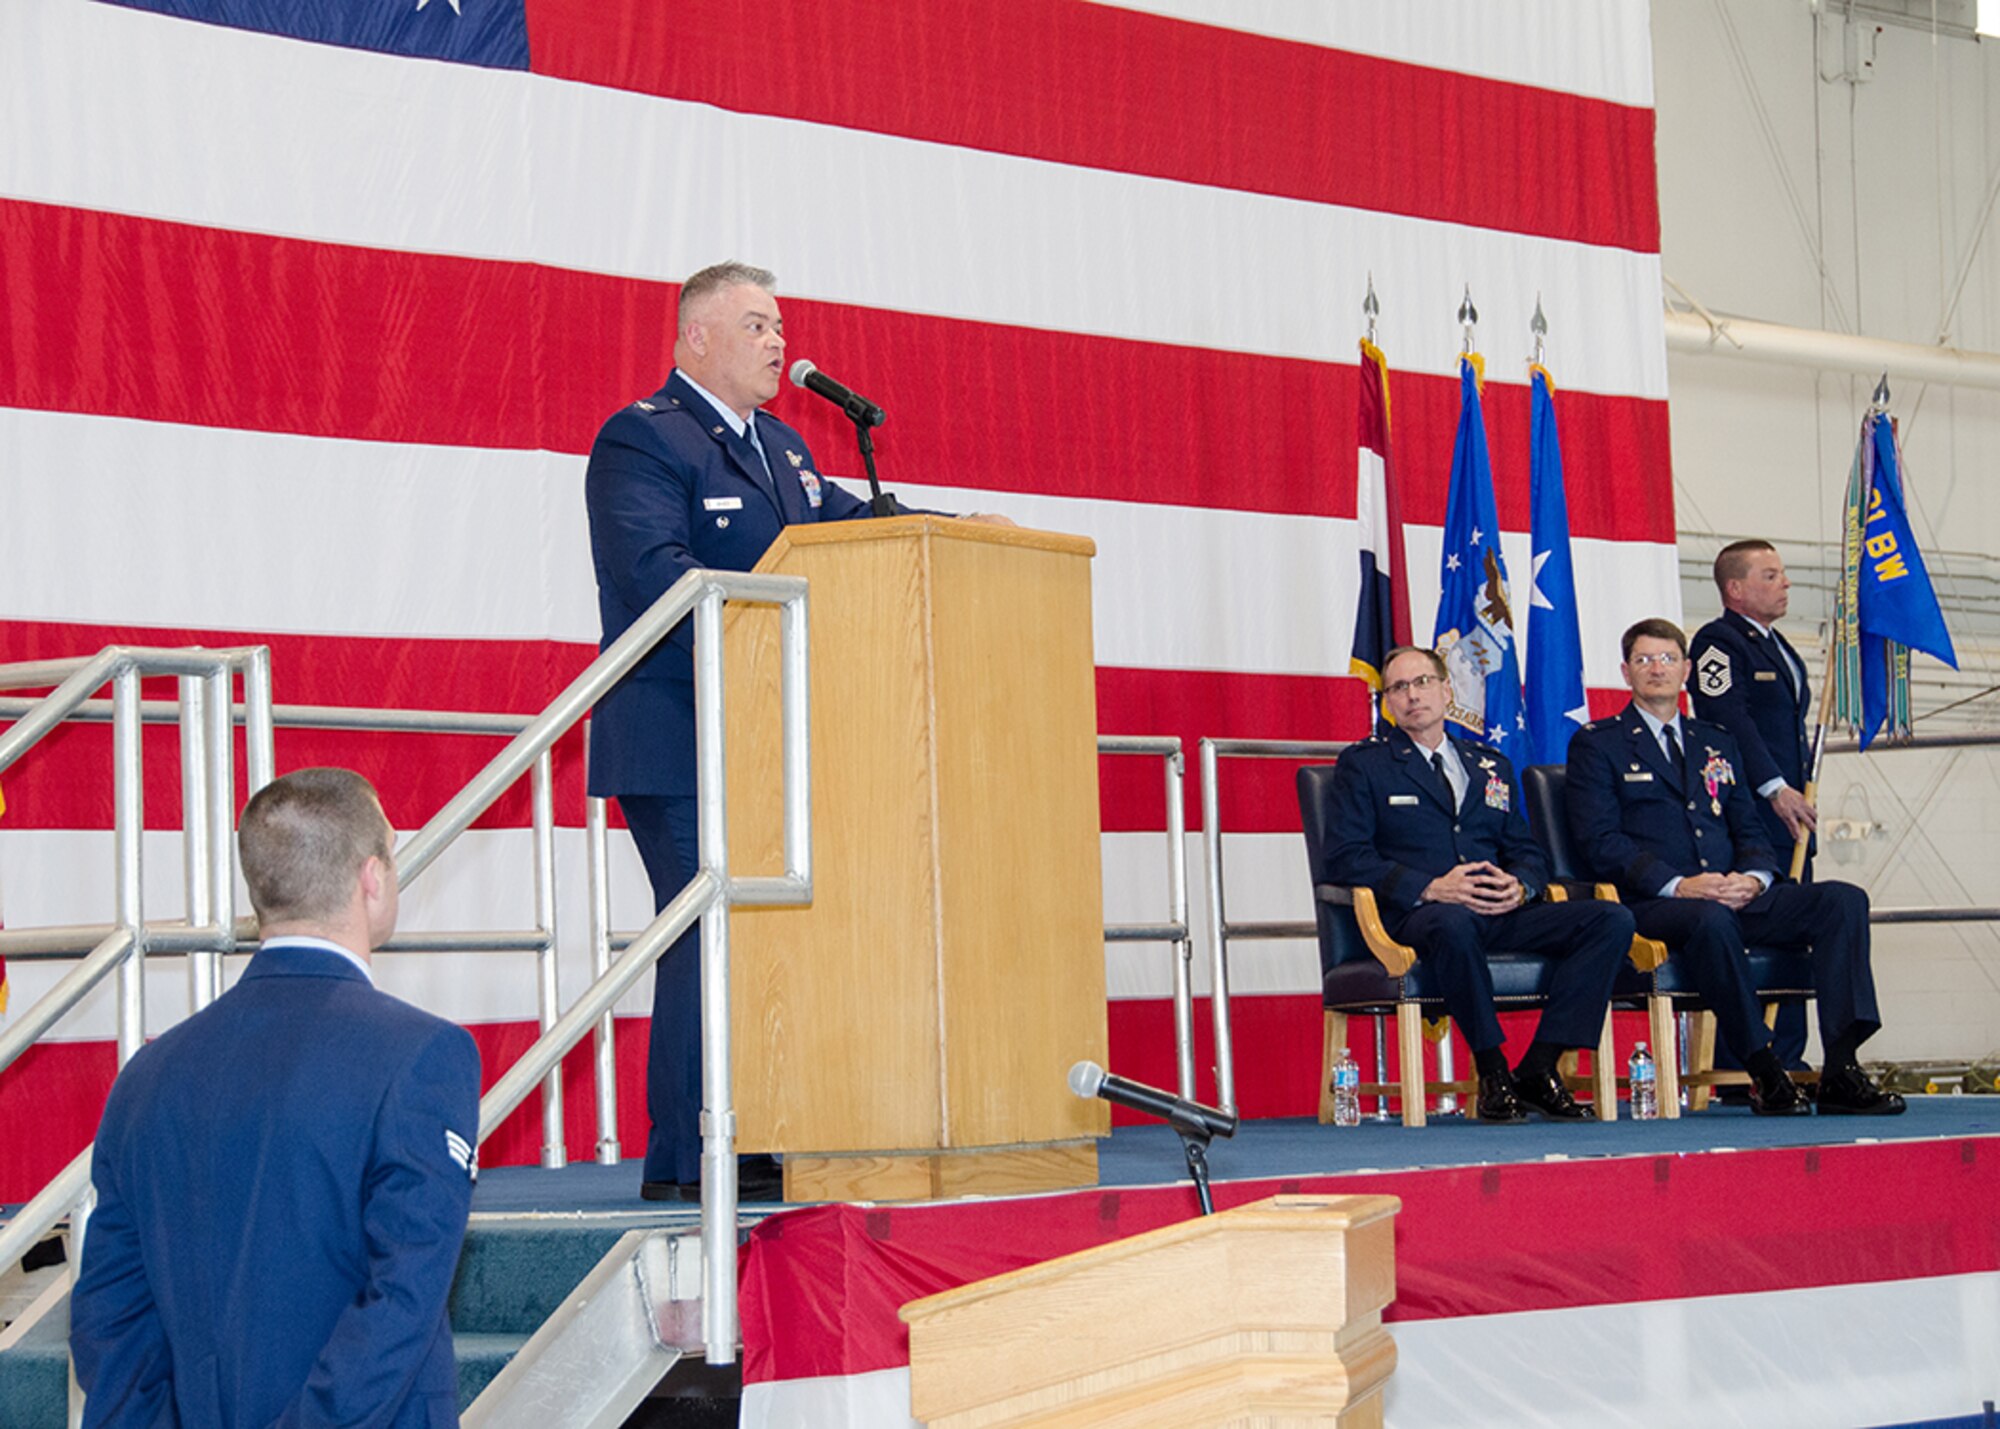 Col. Ken “Willie B” Eaves, 131st Bomb Wing commander, addresses the Airmen of the 131st Bomb Wing as their new wing commander. Eaves is now responsible for the Air National Guard’s only B-2 unit, which provides nearly 1,100 combat-ready Citizen-Airmen for both state and federal missions. (U.S. Air National Guard photo by Airman 1st Class Halley Burgess)

